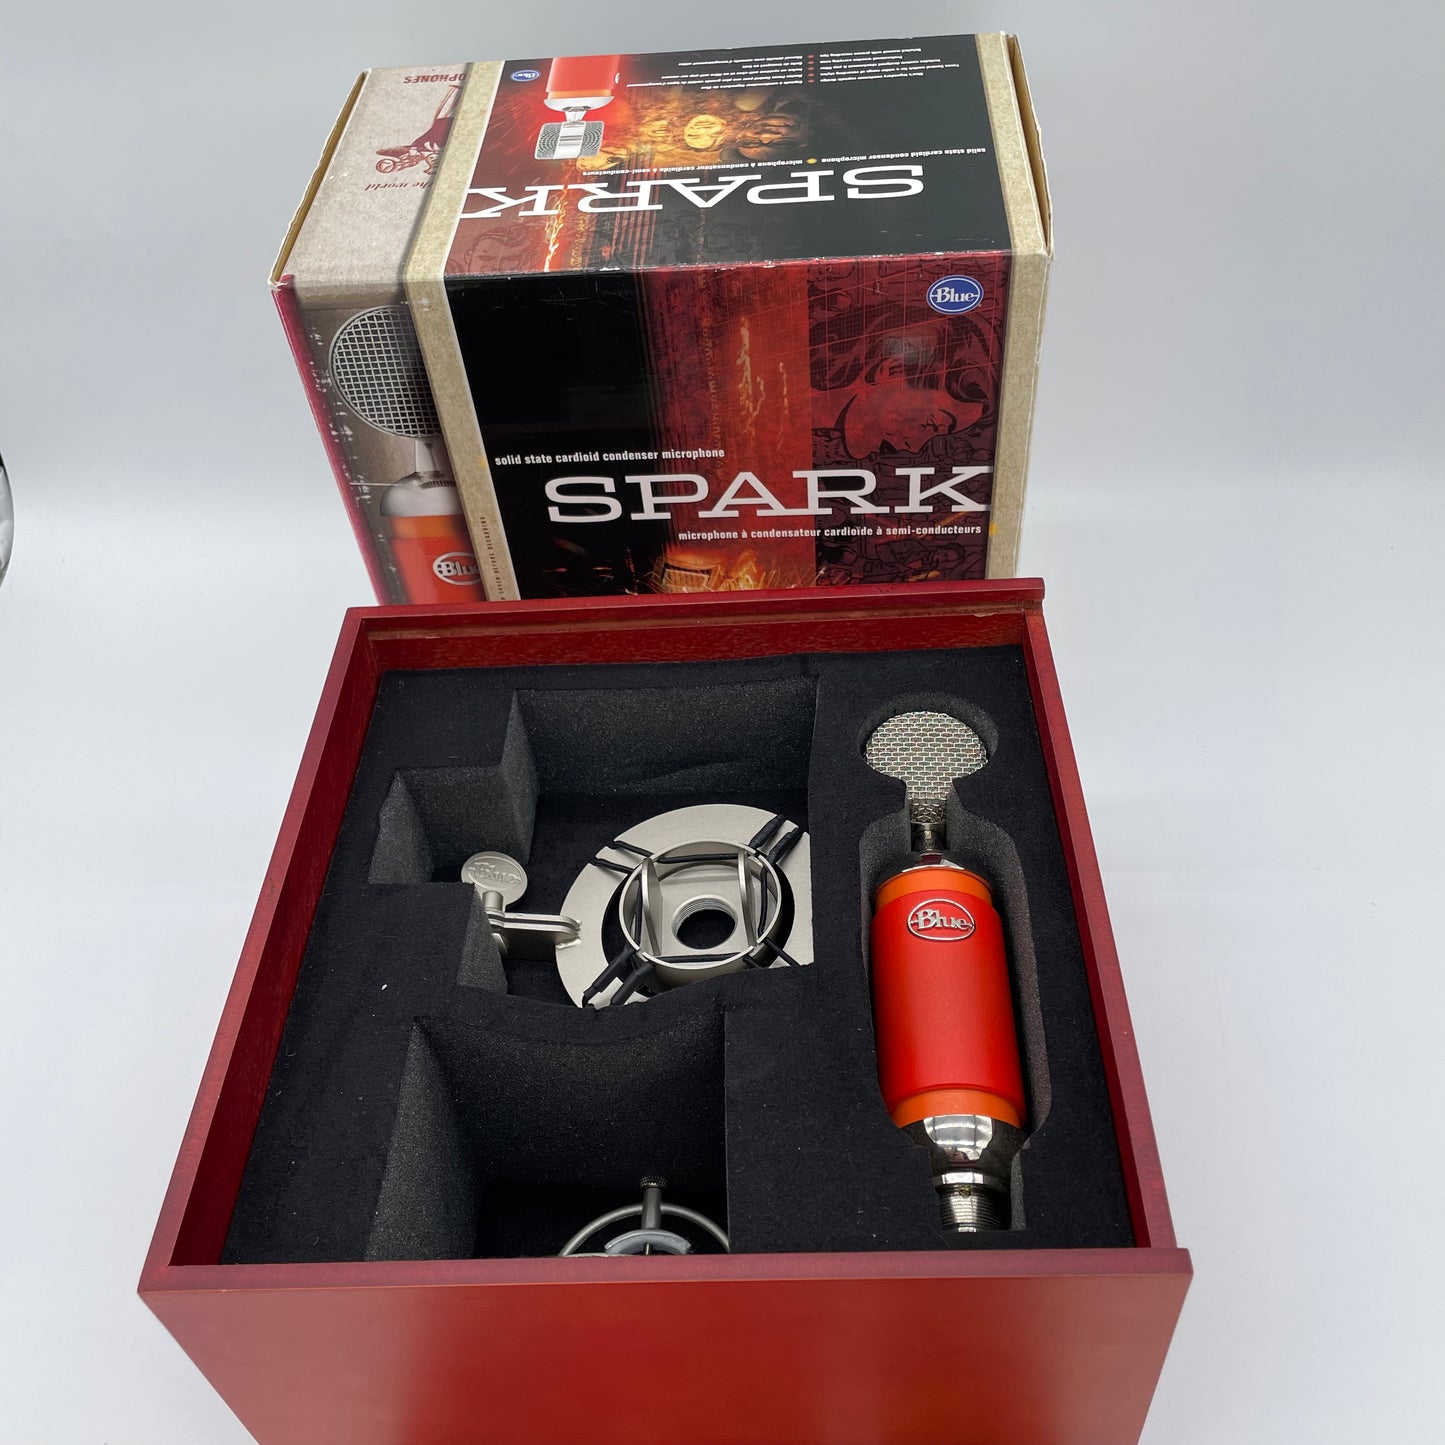 Blue Spark Solid State Cardioid Condenser Microphone